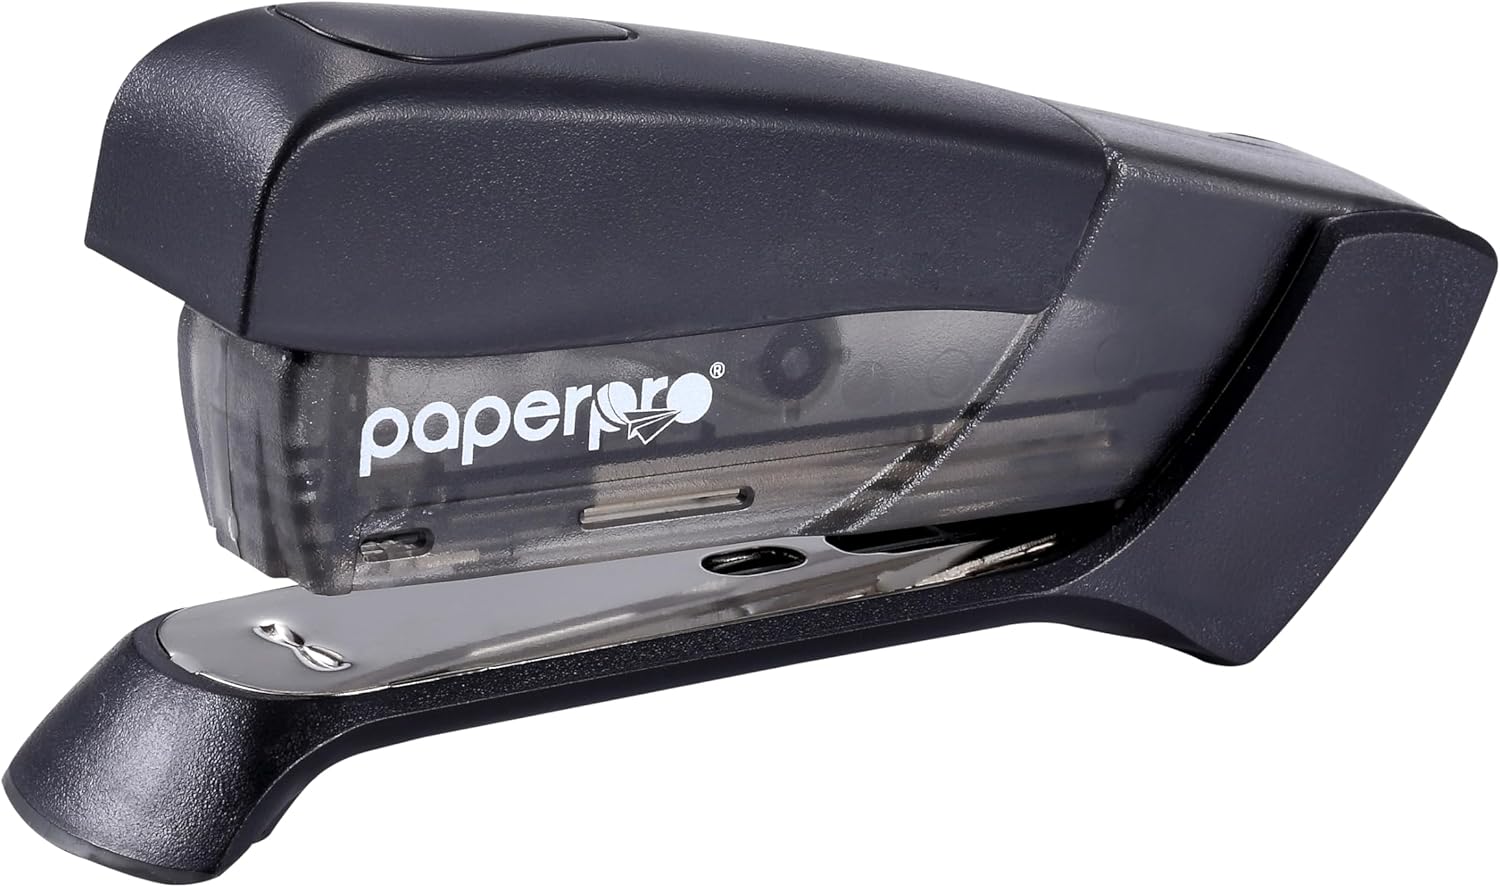 Bostitch Office Compact Classic Desktop Stapler,15 Sheet Capacity, No Effort, Includes 105 Staples, One Finger, 80% Easier Stapling- Great for Carpal Tunnel and Arthritis, Assorted (Colors May Vary)